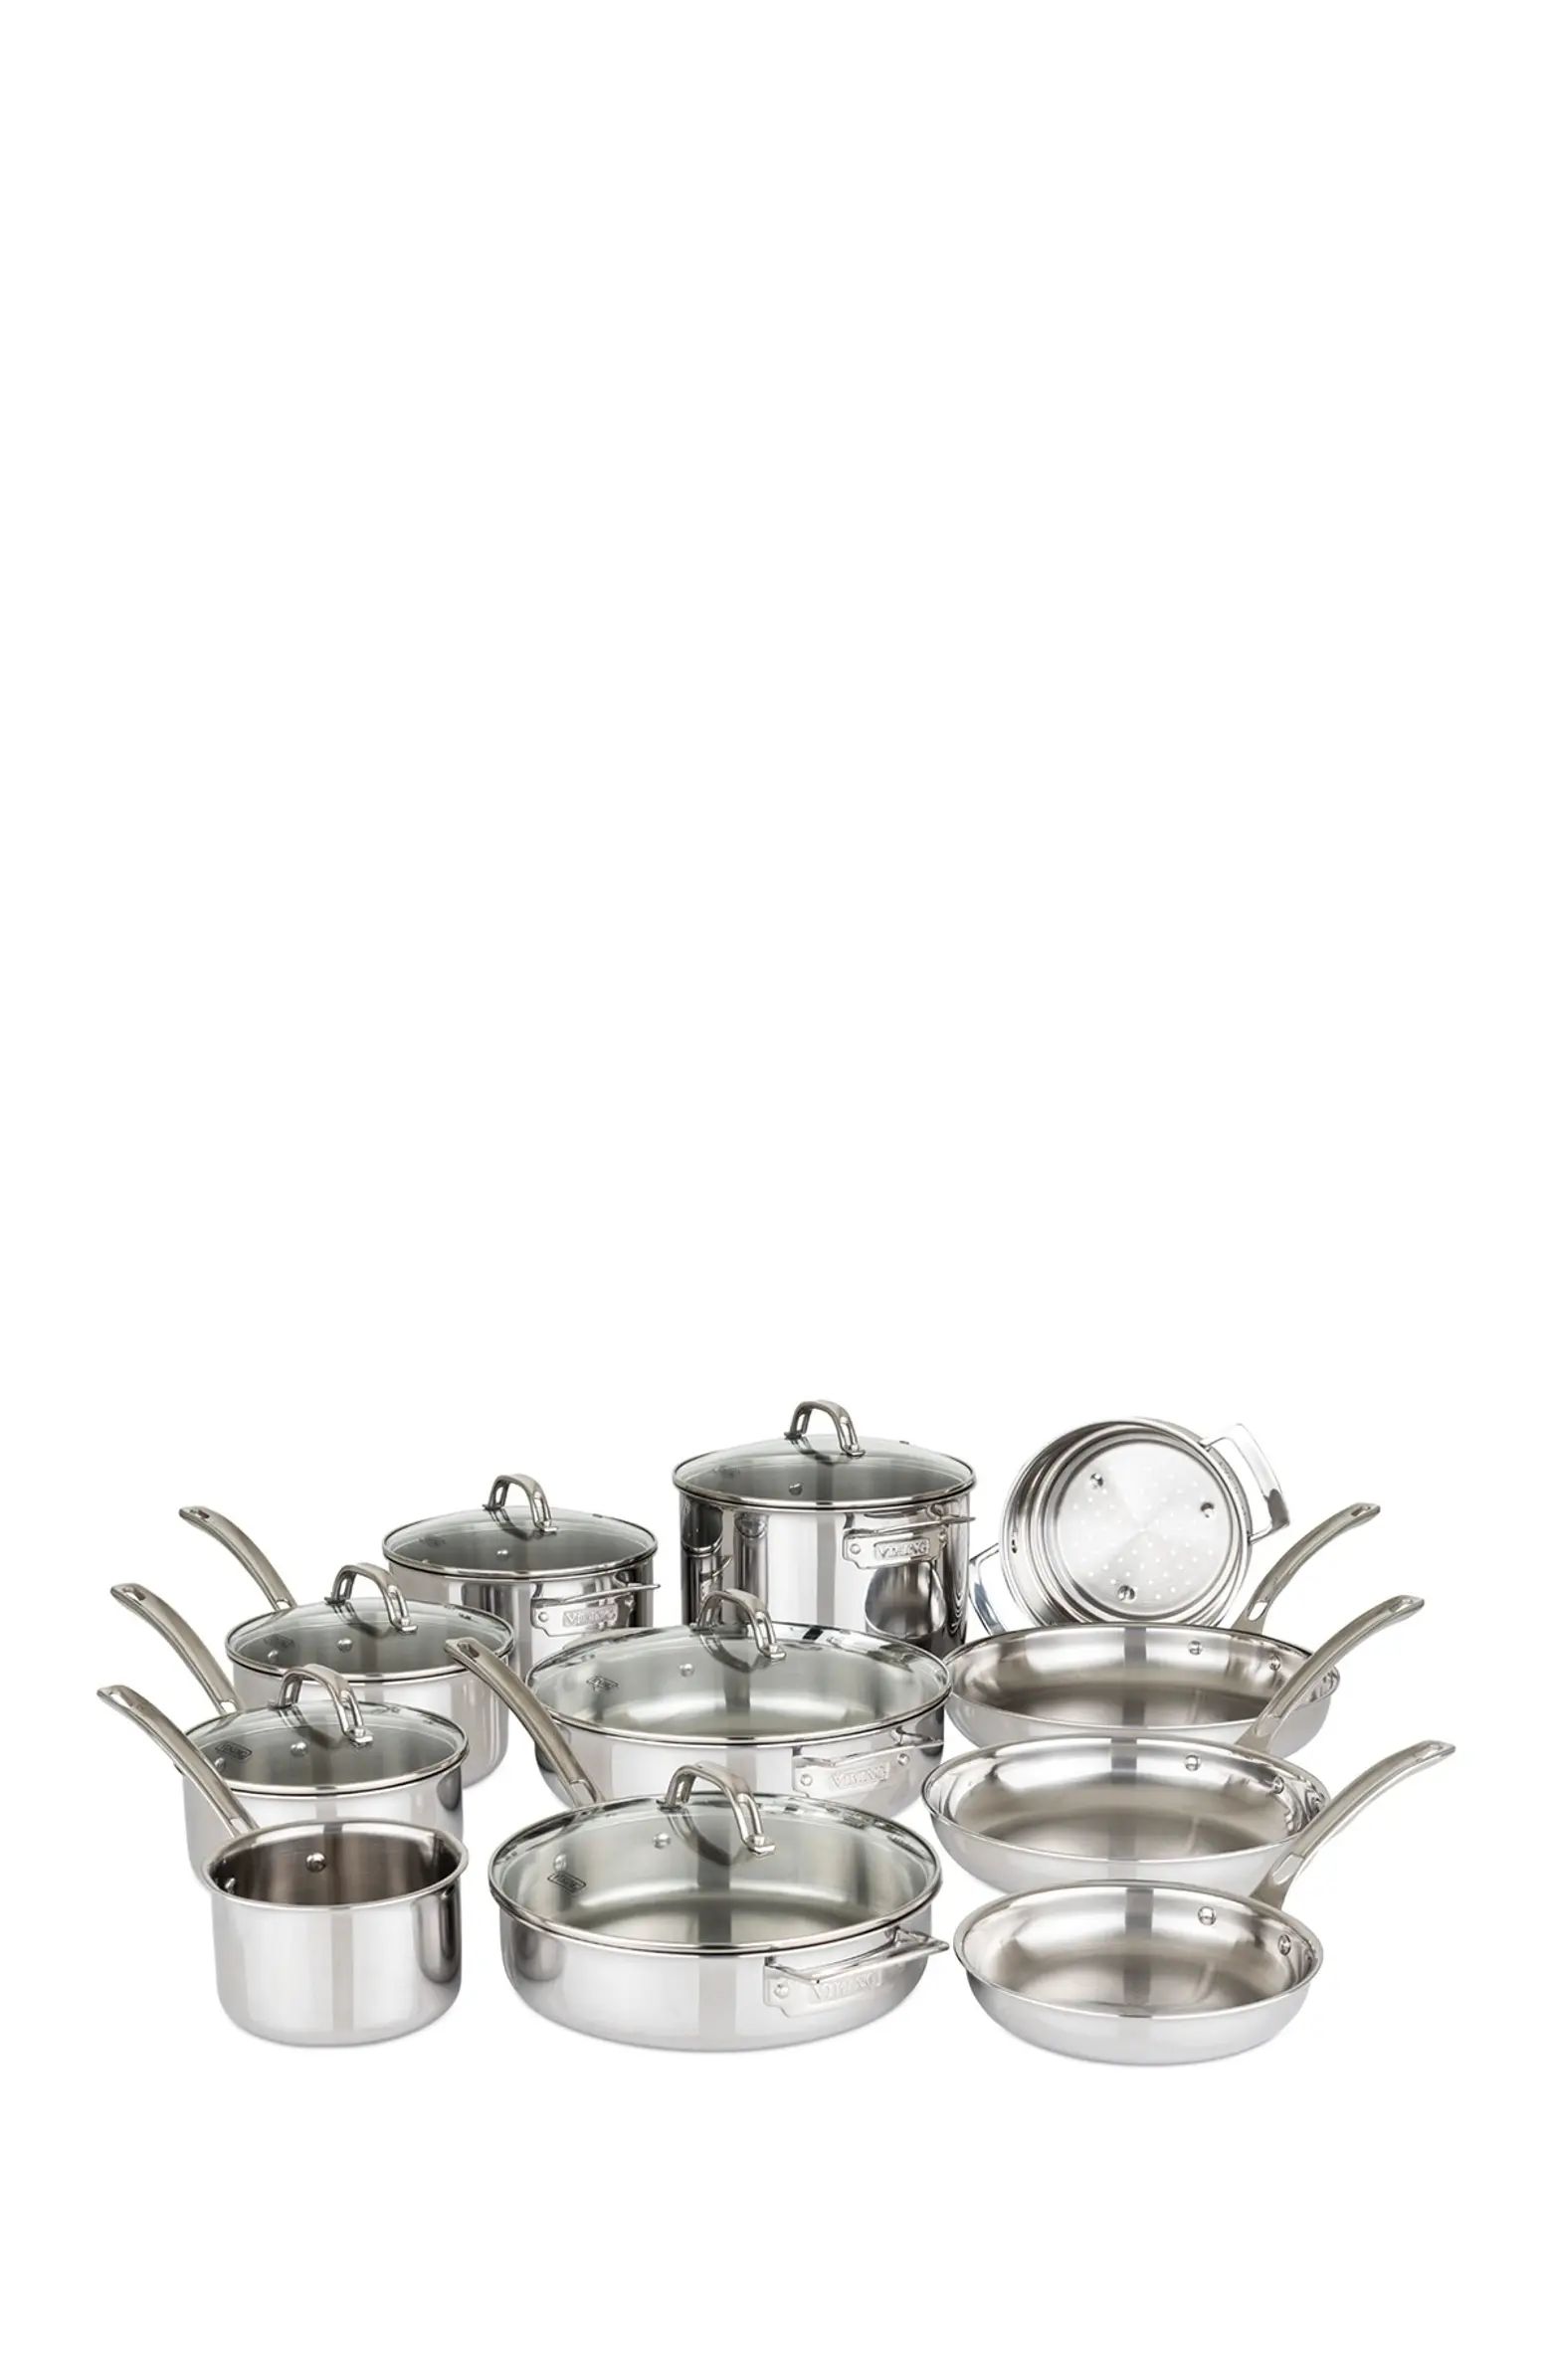 17-Piece 3-Ply Stainless Steel Cookware Set | Nordstrom